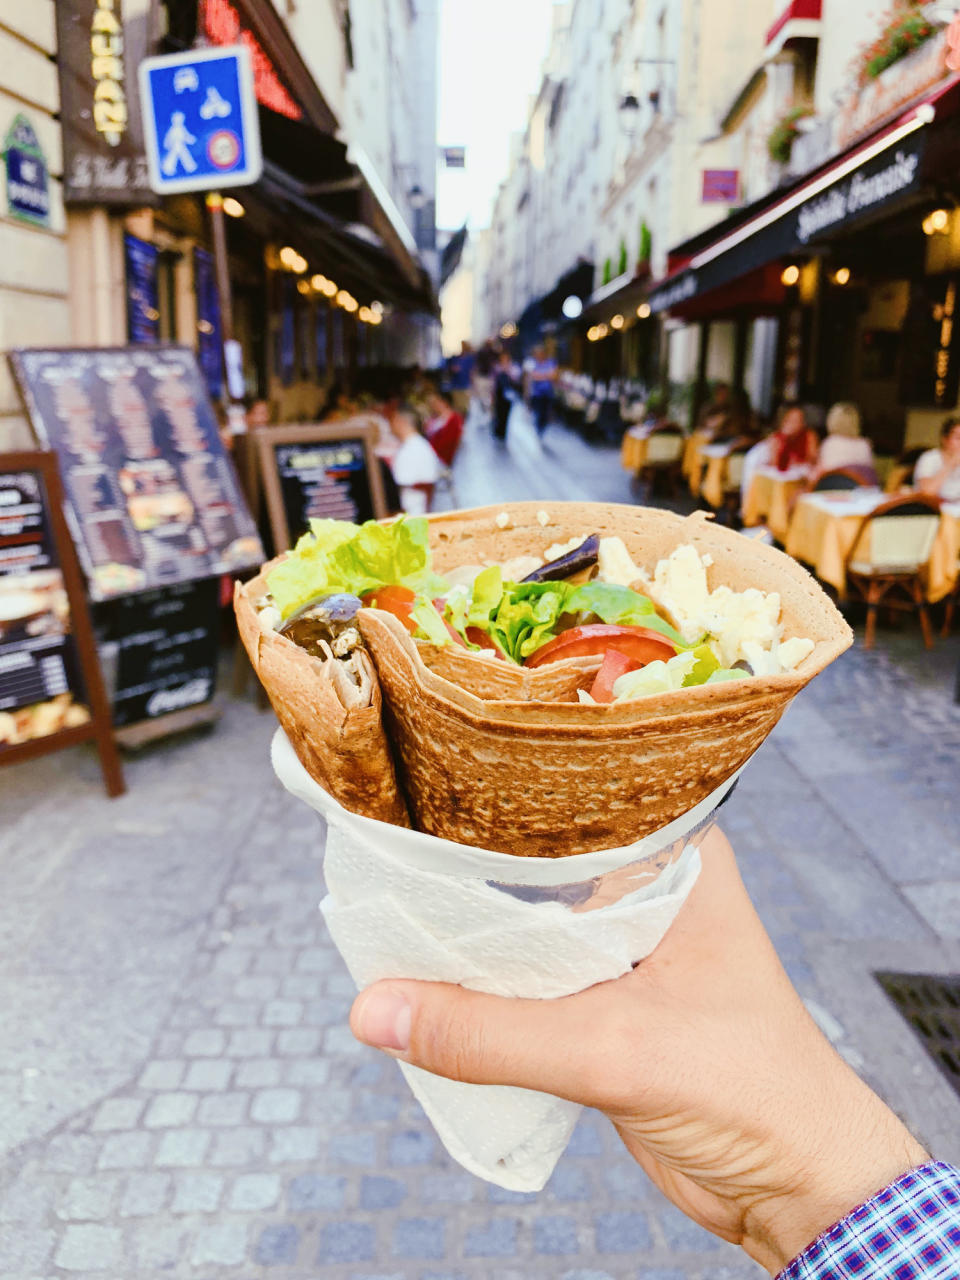 A crepe on the street.